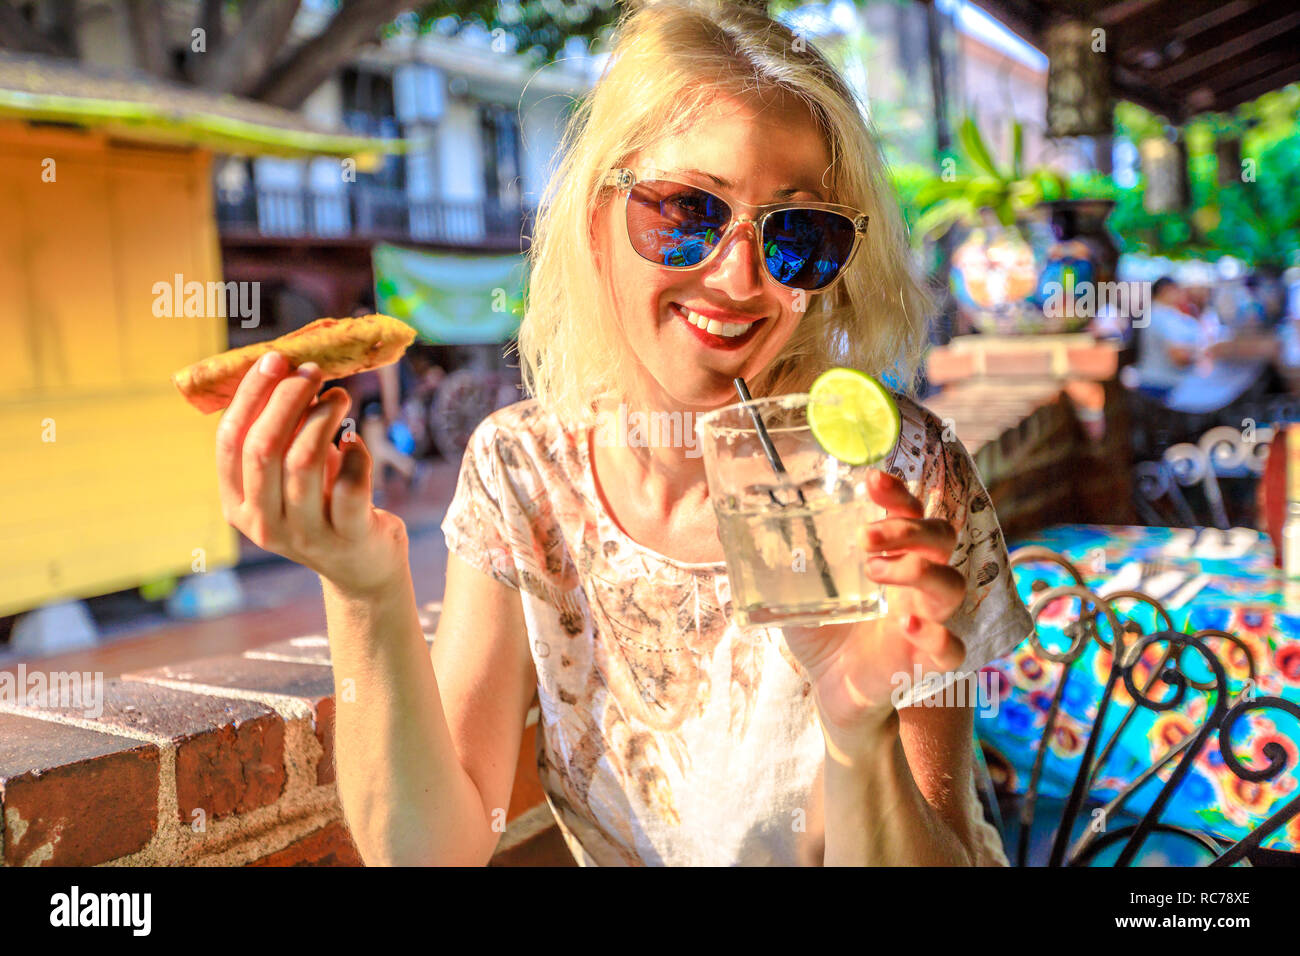 Happy caucasian woman drinks Margarita, Mexican cocktail based on tequila, and eats enchilada, a typical Mexican food. El Pueblo in Los Angeles Downtown State Historic Park, California, United States. Stock Photo